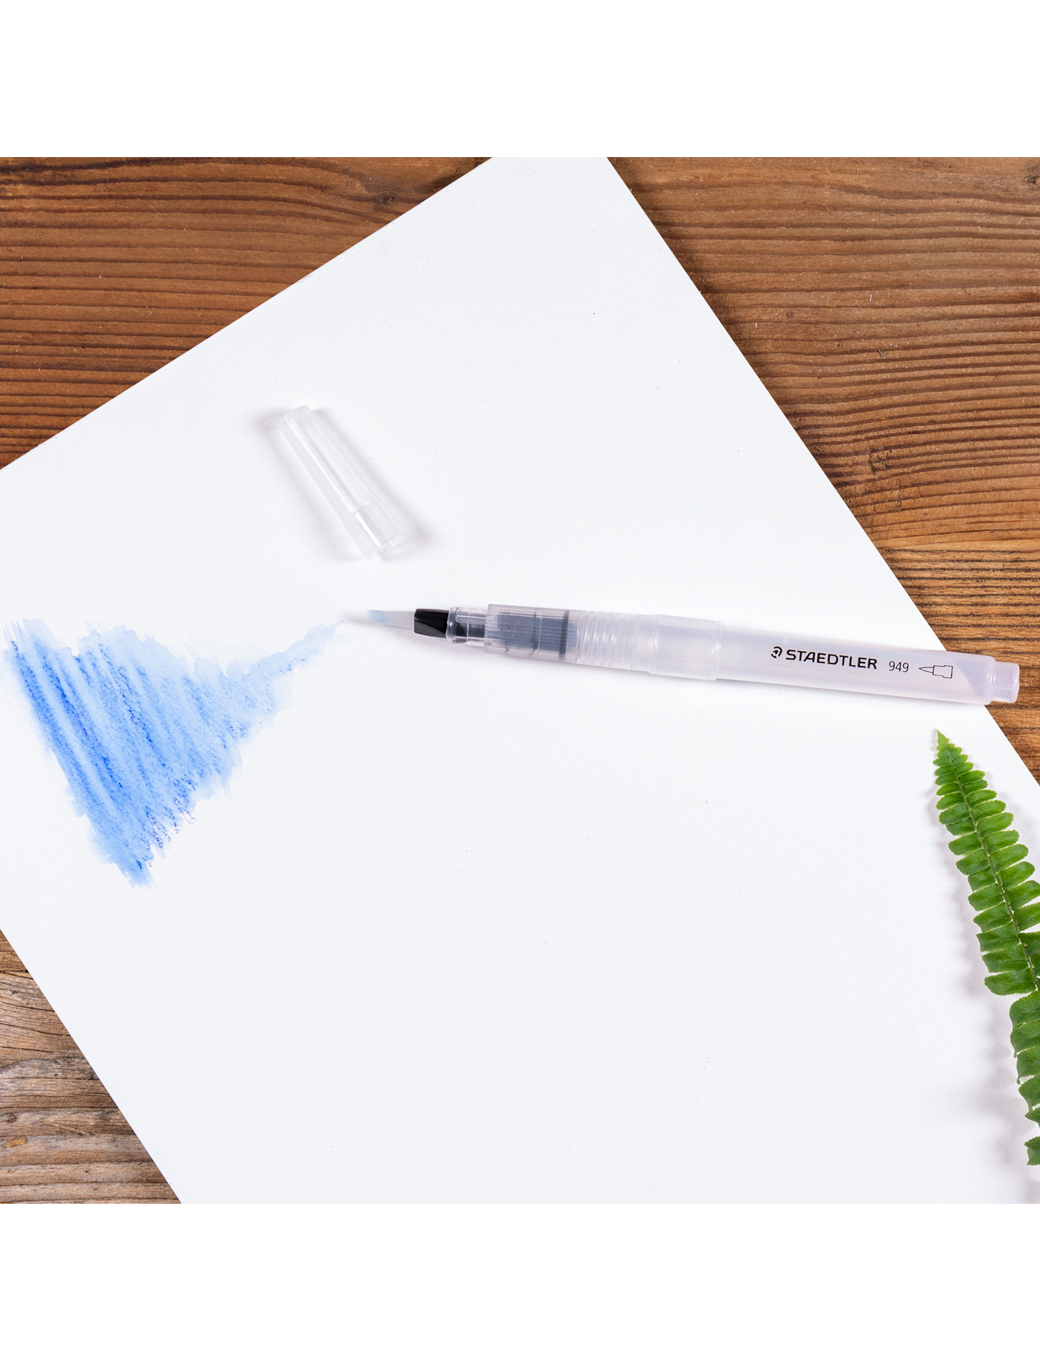 Water brush for aquarelle, staedtler 949, in use on paper with aquarelle